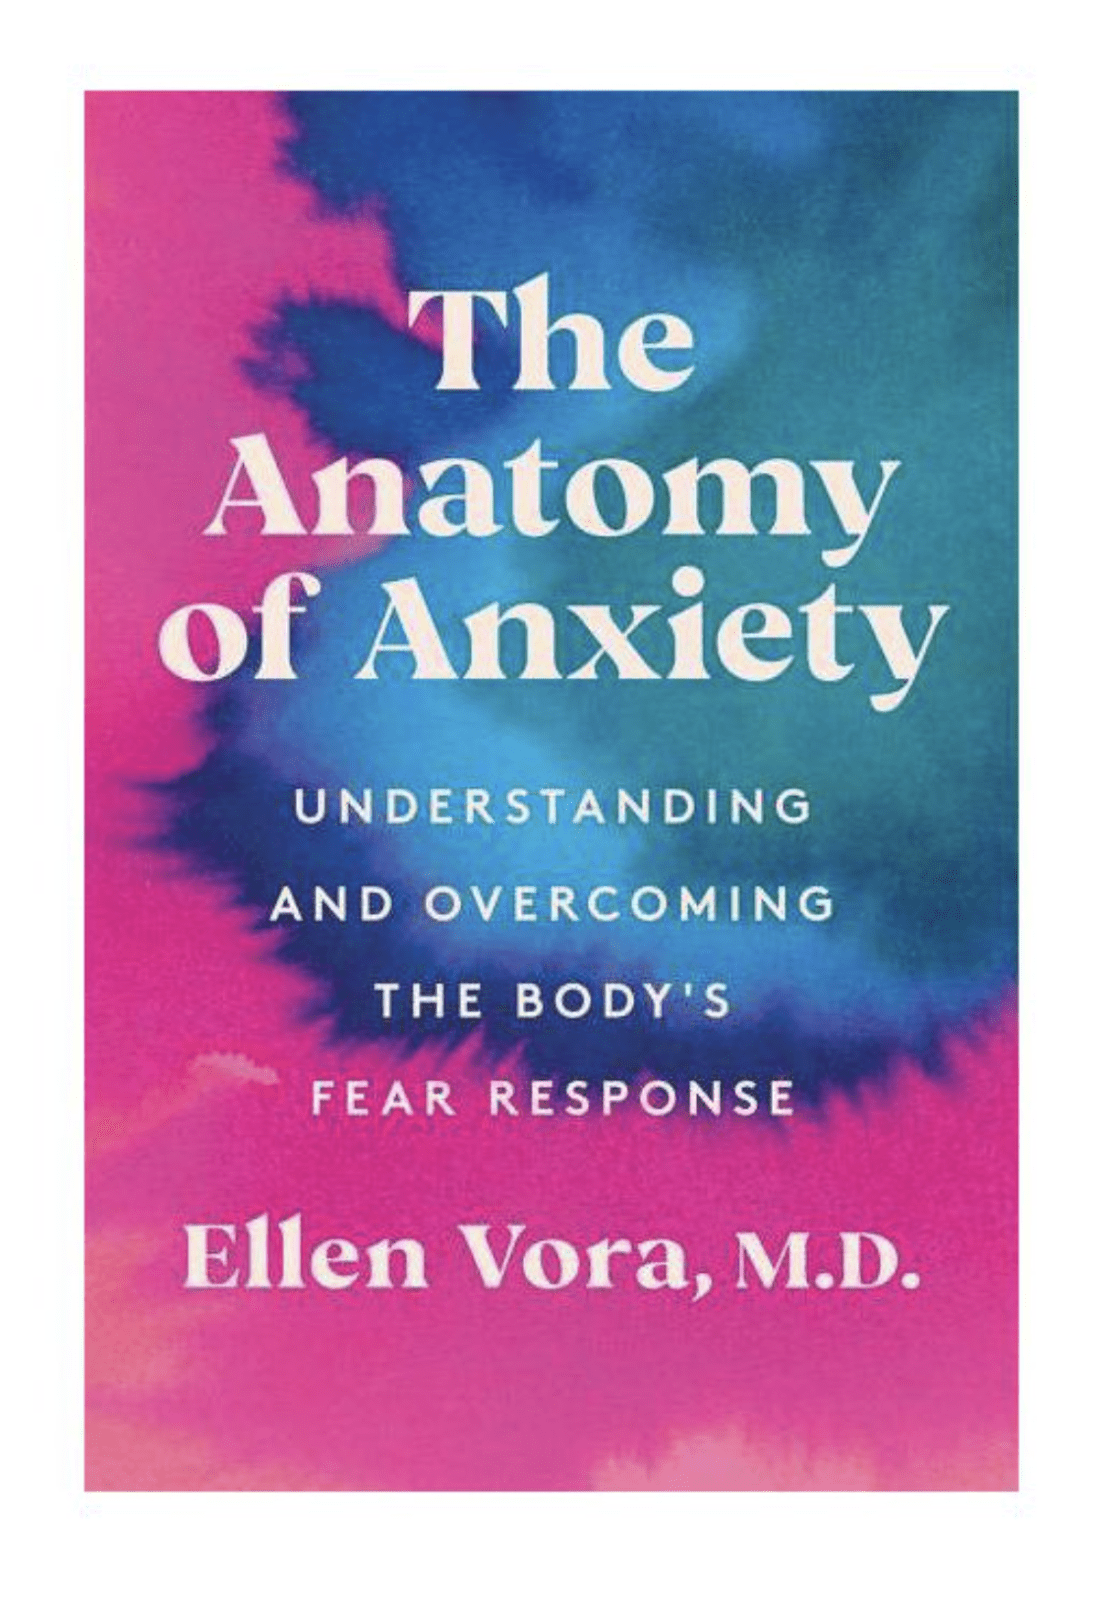 Things I Loved in March: The Anatomy of Anxiety by Ellen Vora, M.D.